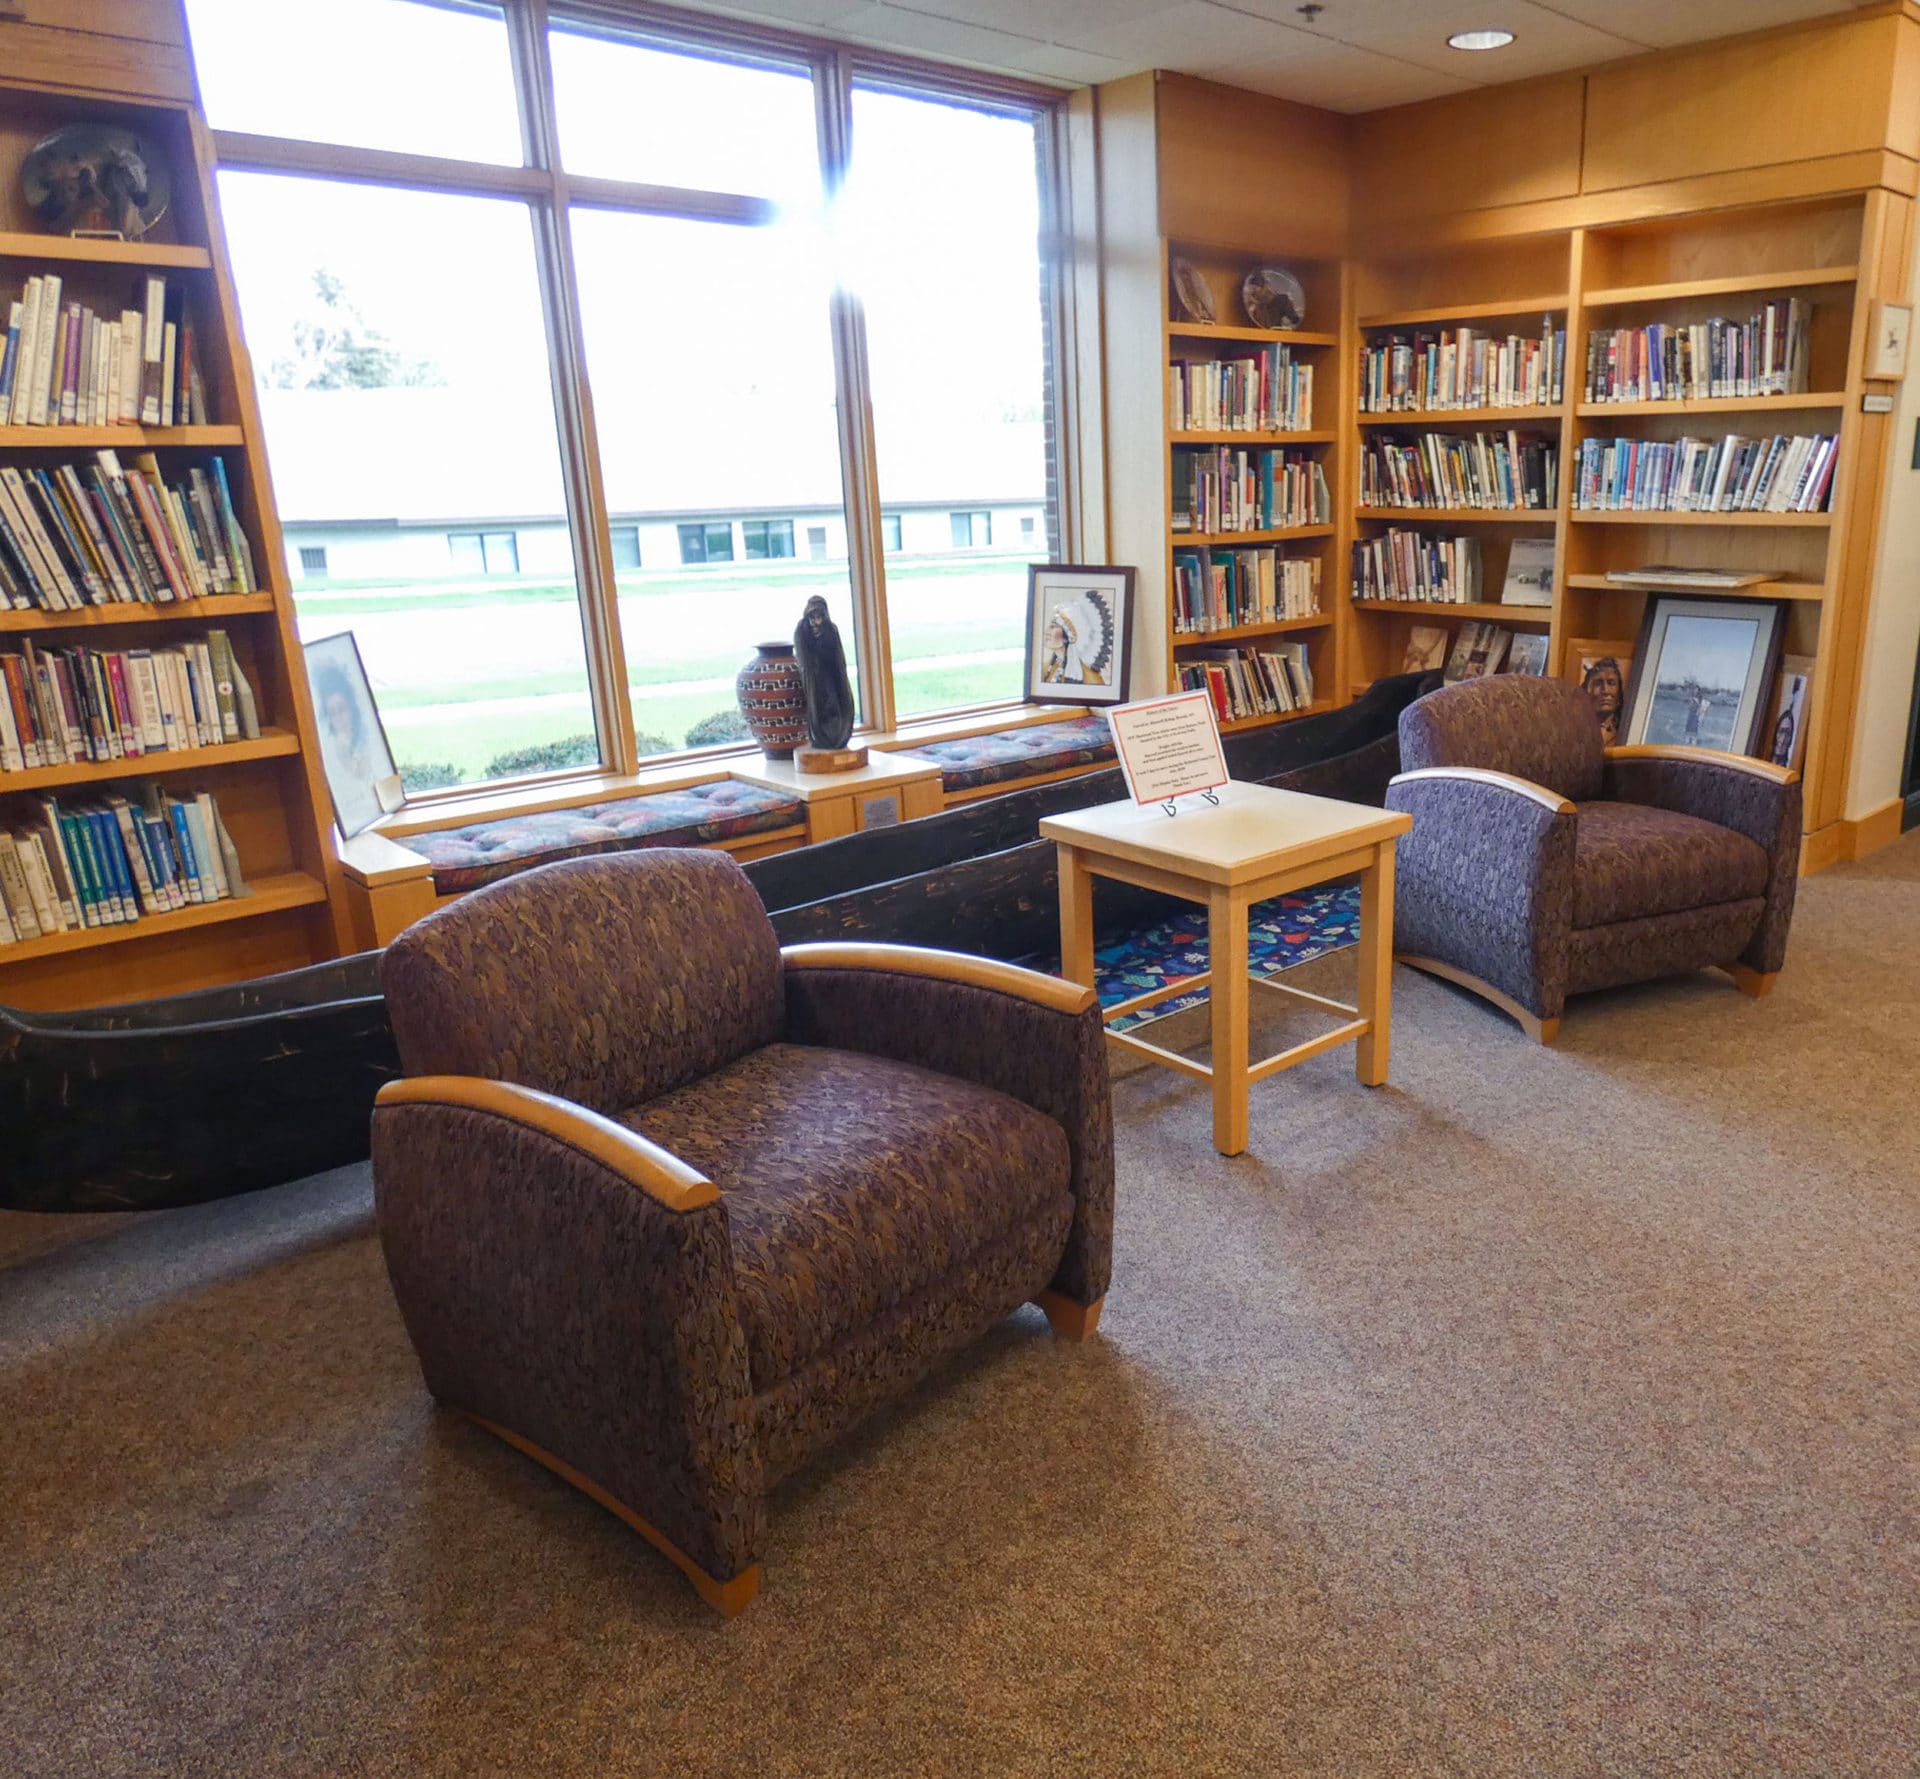 Children's Library in Redwood Falls MN